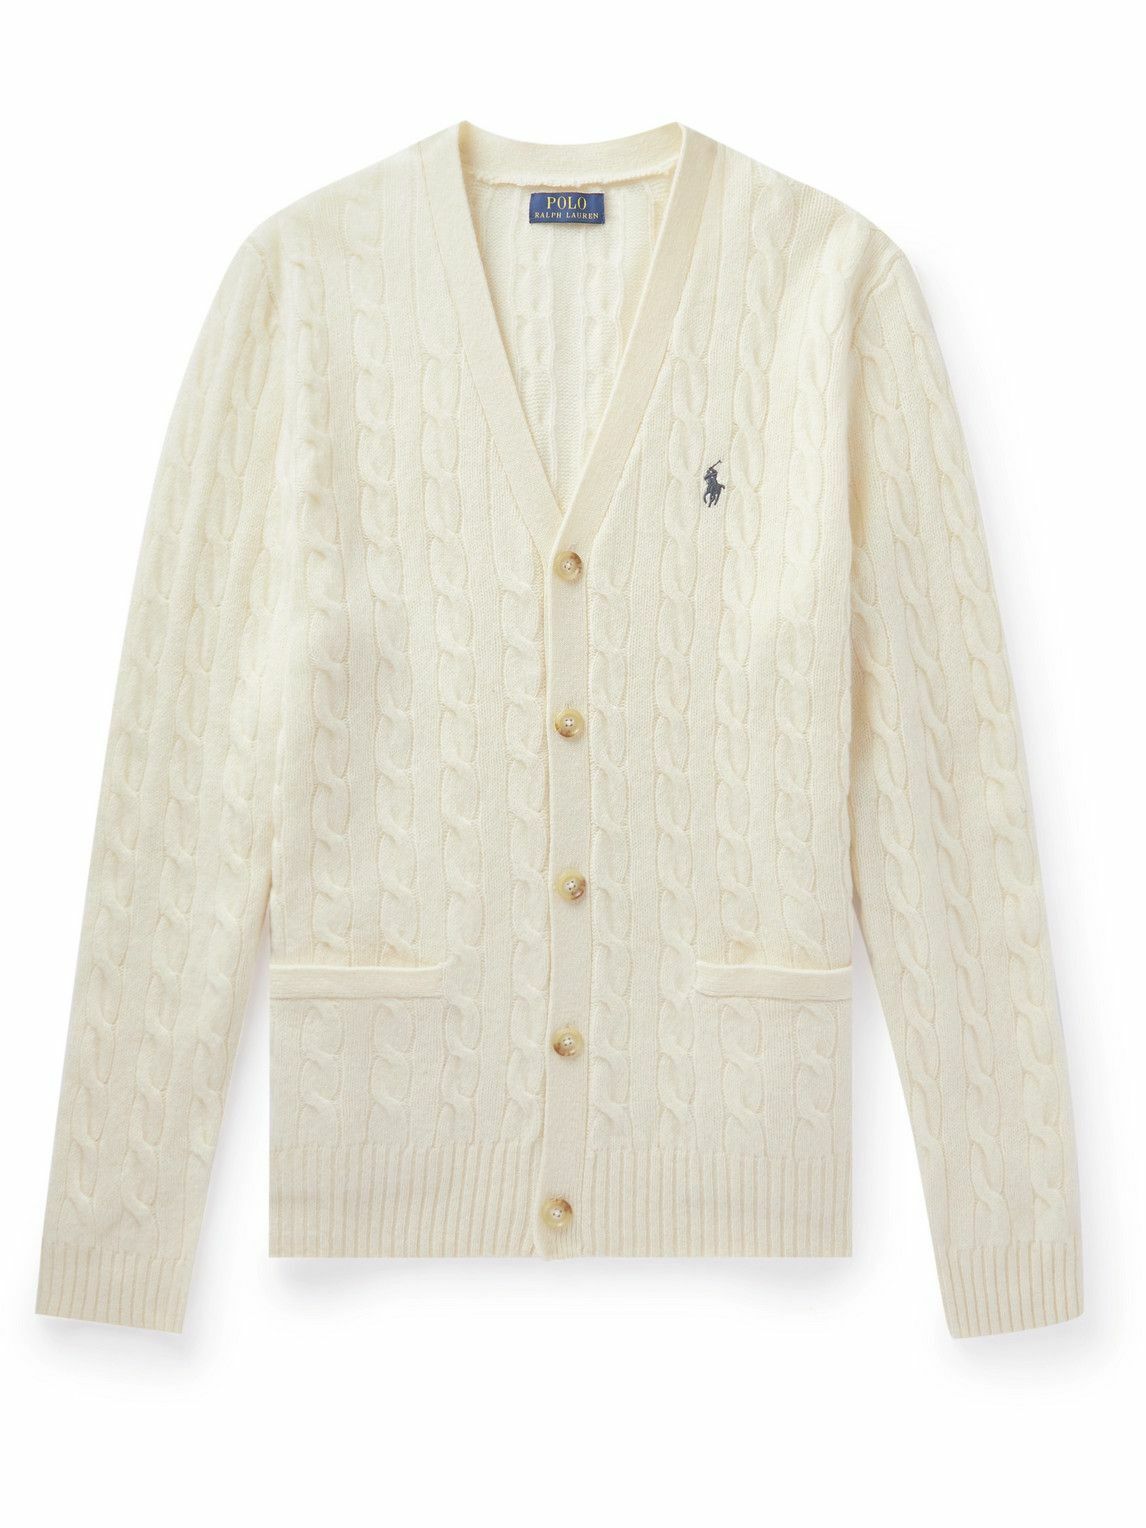 Polo Ralph Lauren - Cable-Knit Wool and Cashmere-Blend Cardigan - Neutrals